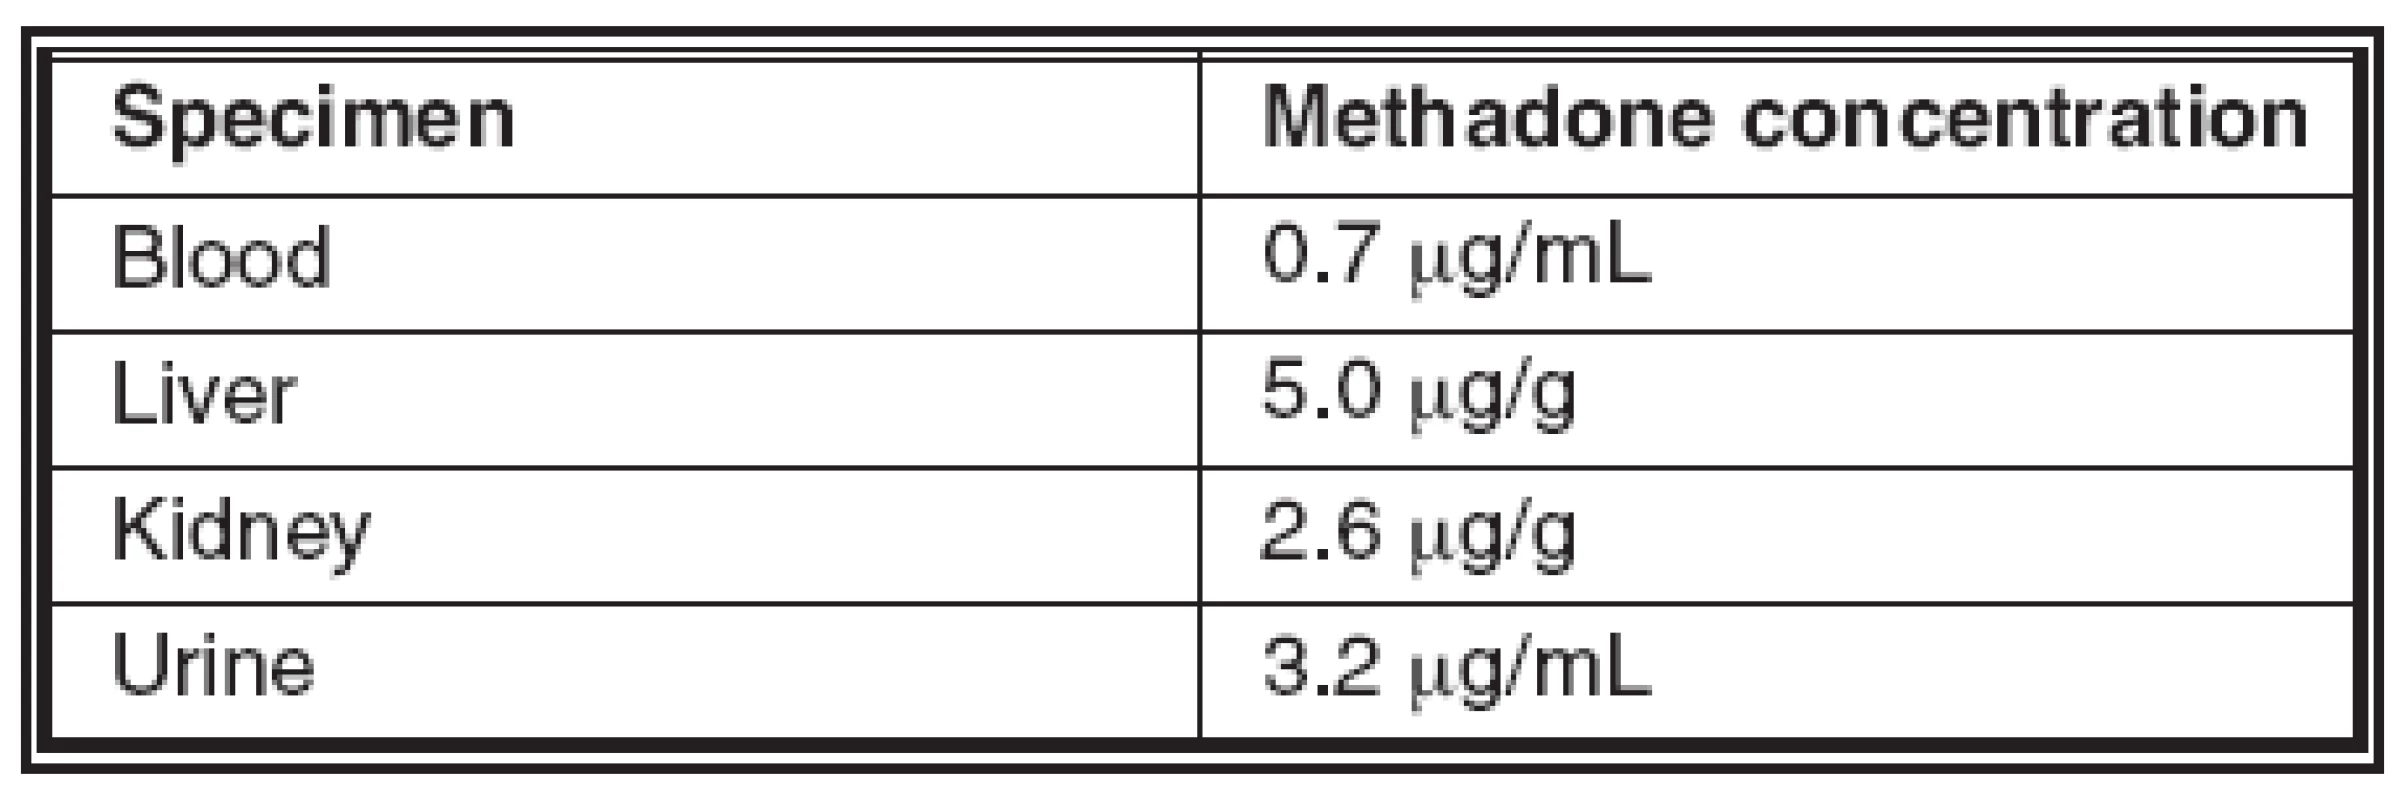 Methadone concentration in the post-mortem fluids and tissues of a 11-month-old male infant